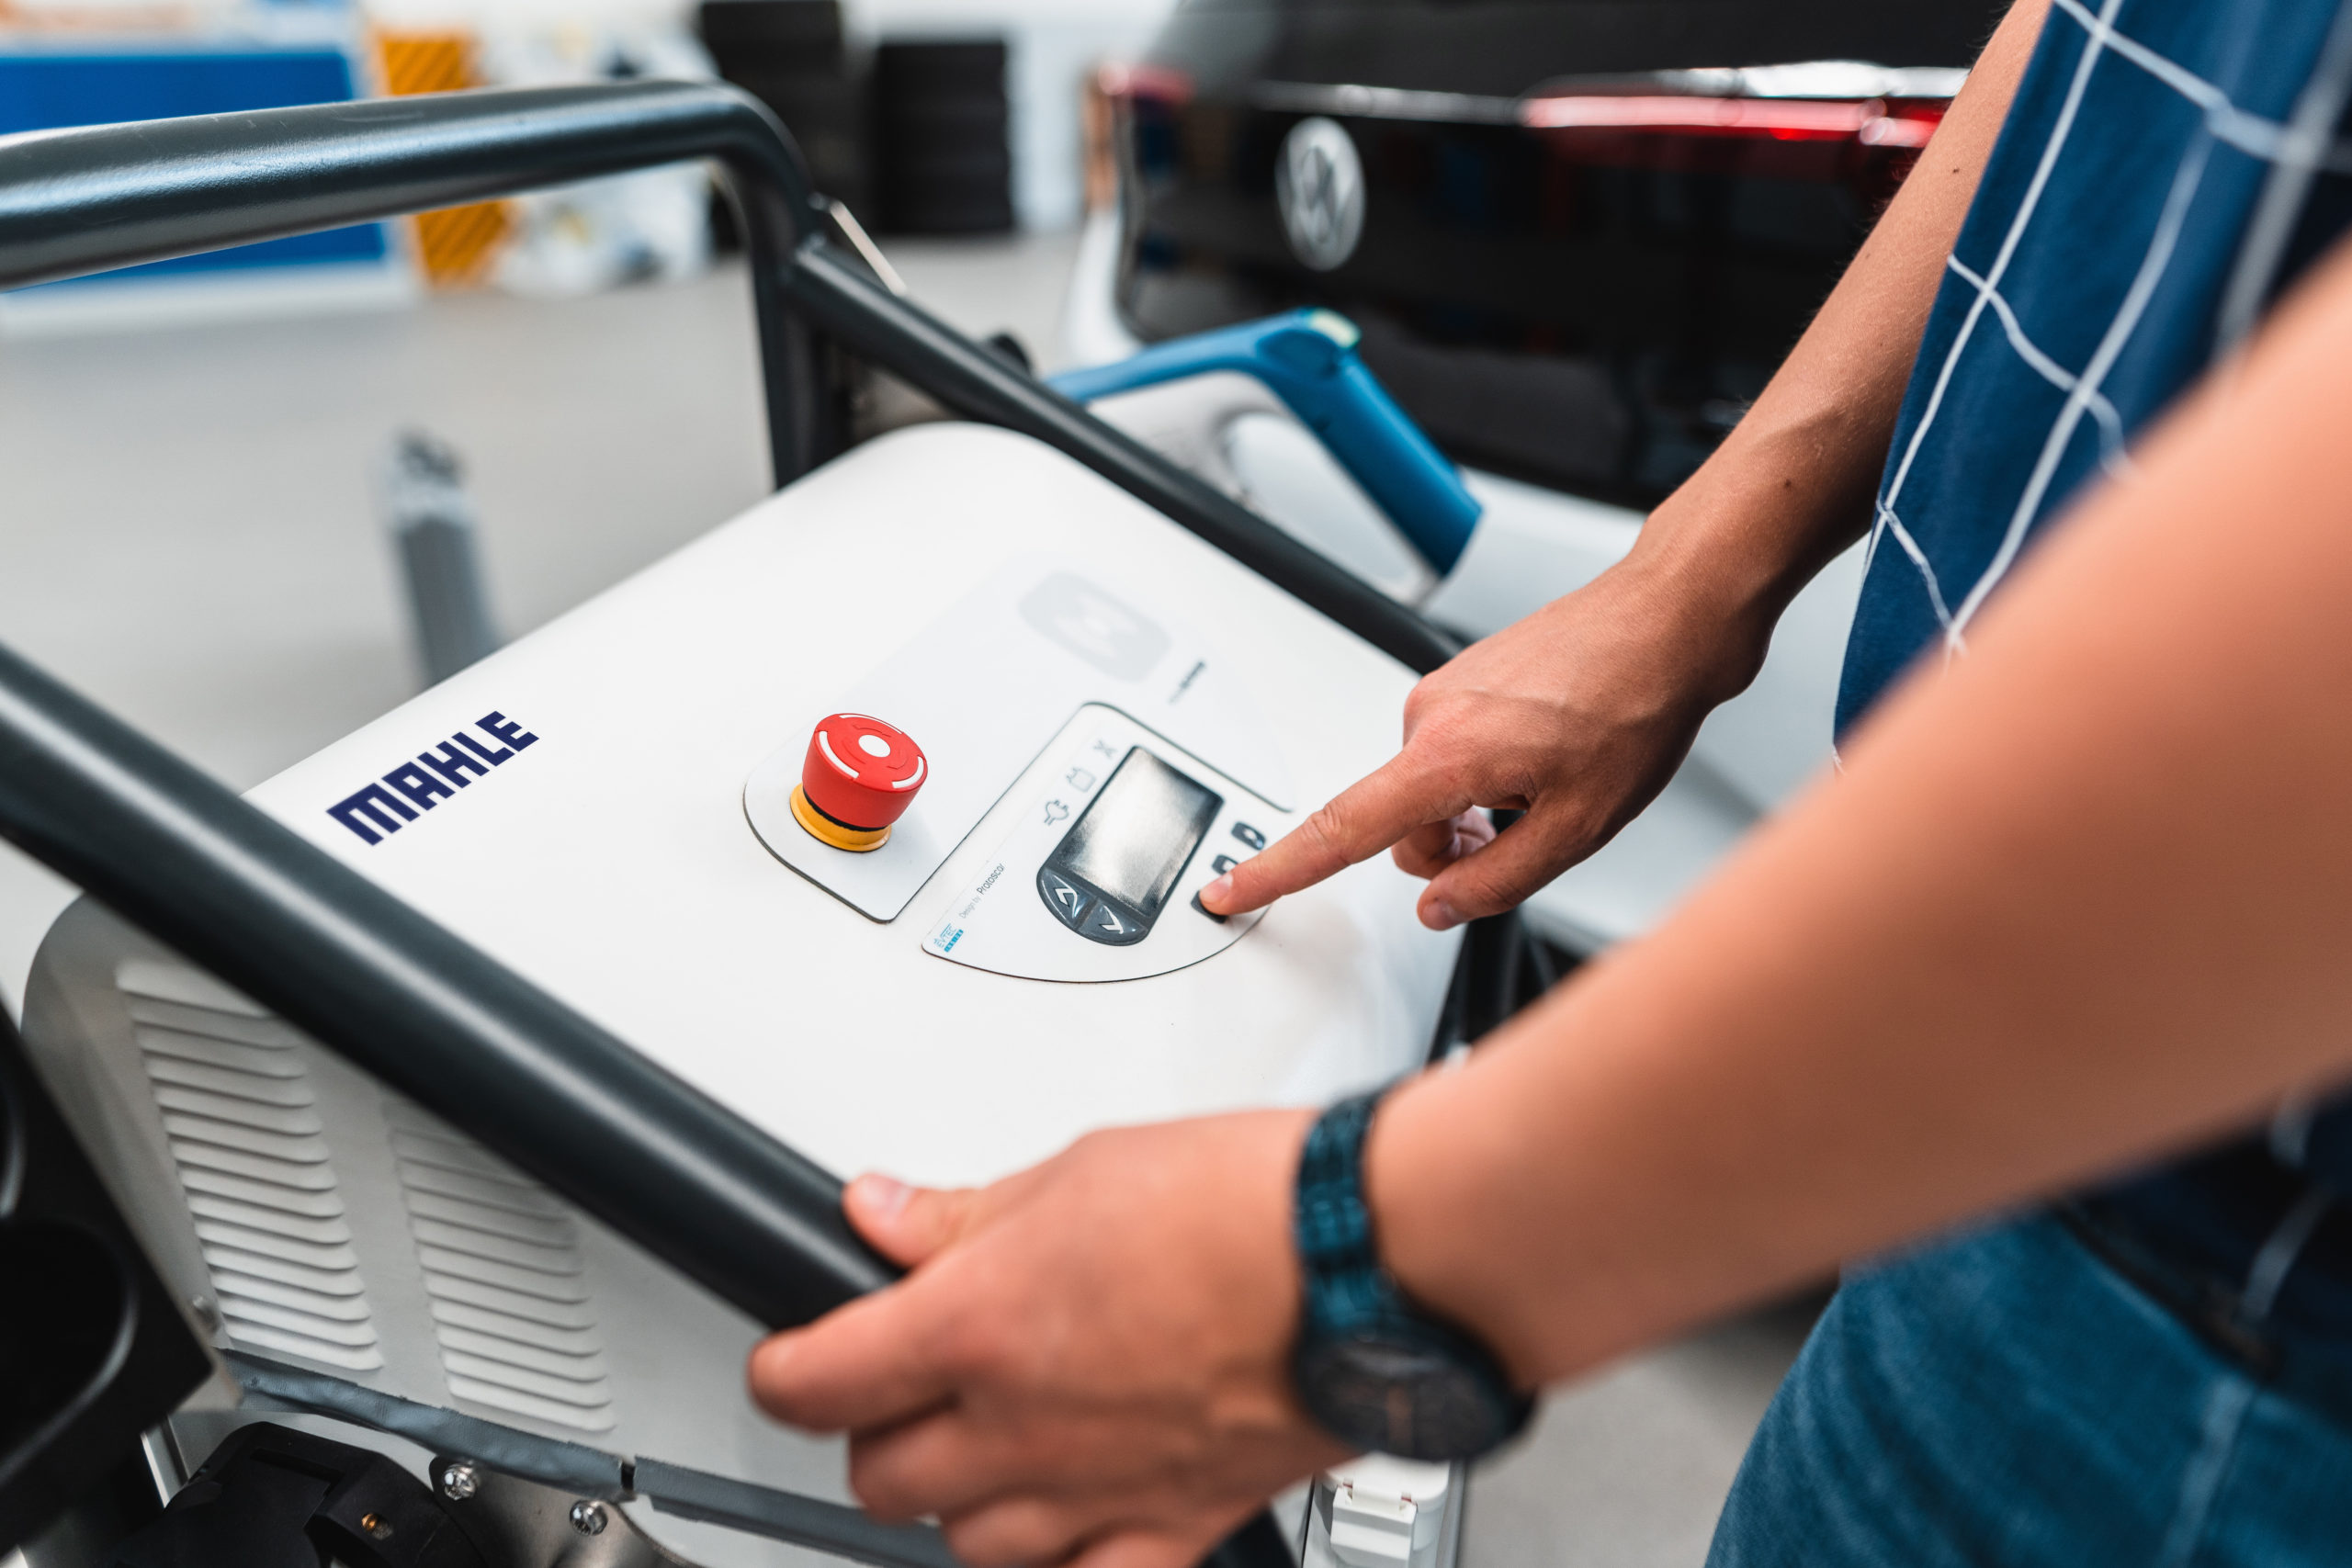 MAHLE presents a complete electric vehicle solution for independent workshops at Automechanika